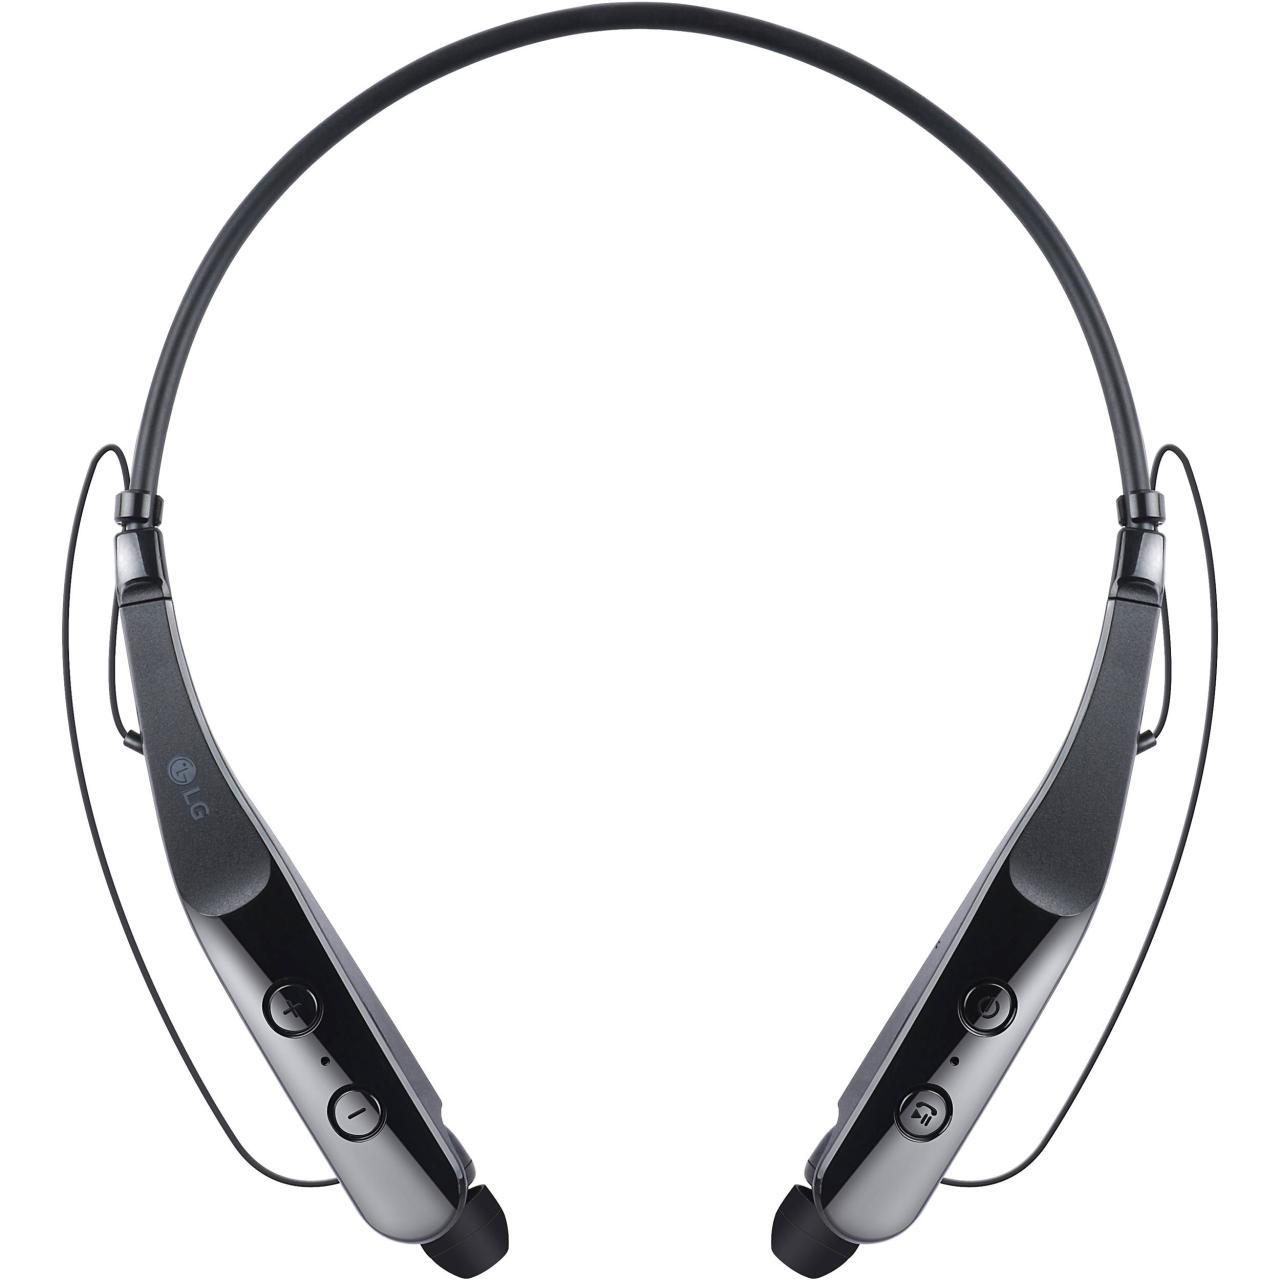 lg bluetooth headset noise cancellings
